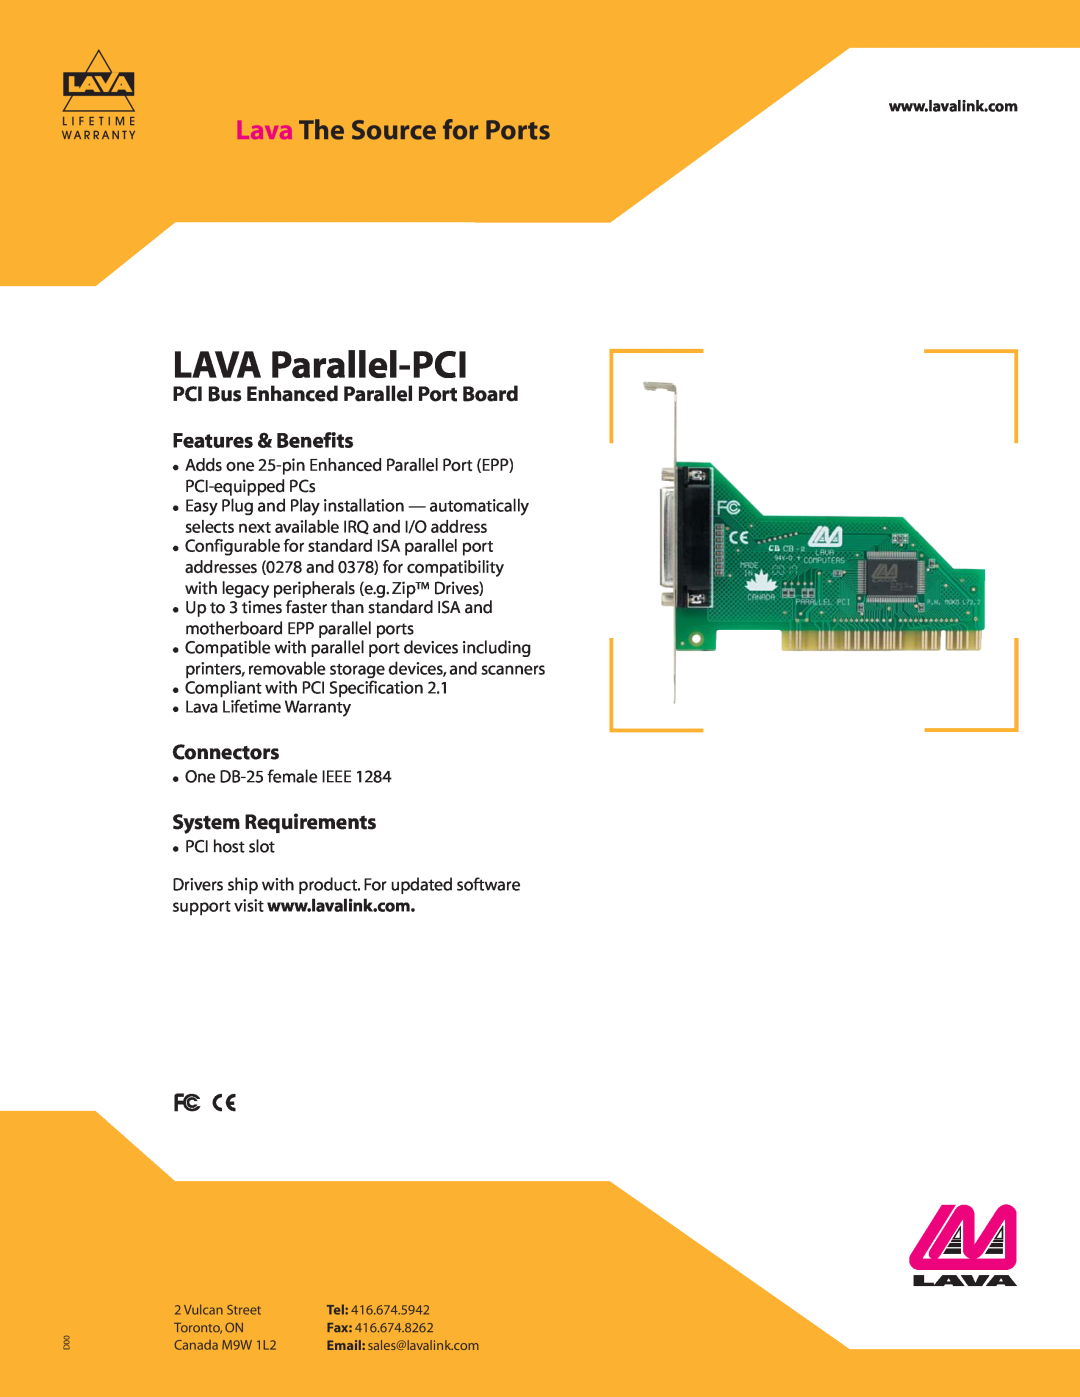 Lava Computer DB-25 warranty LAVA Parallel-PCI, Lava The Source for Ports, Connectors, System Requirements 